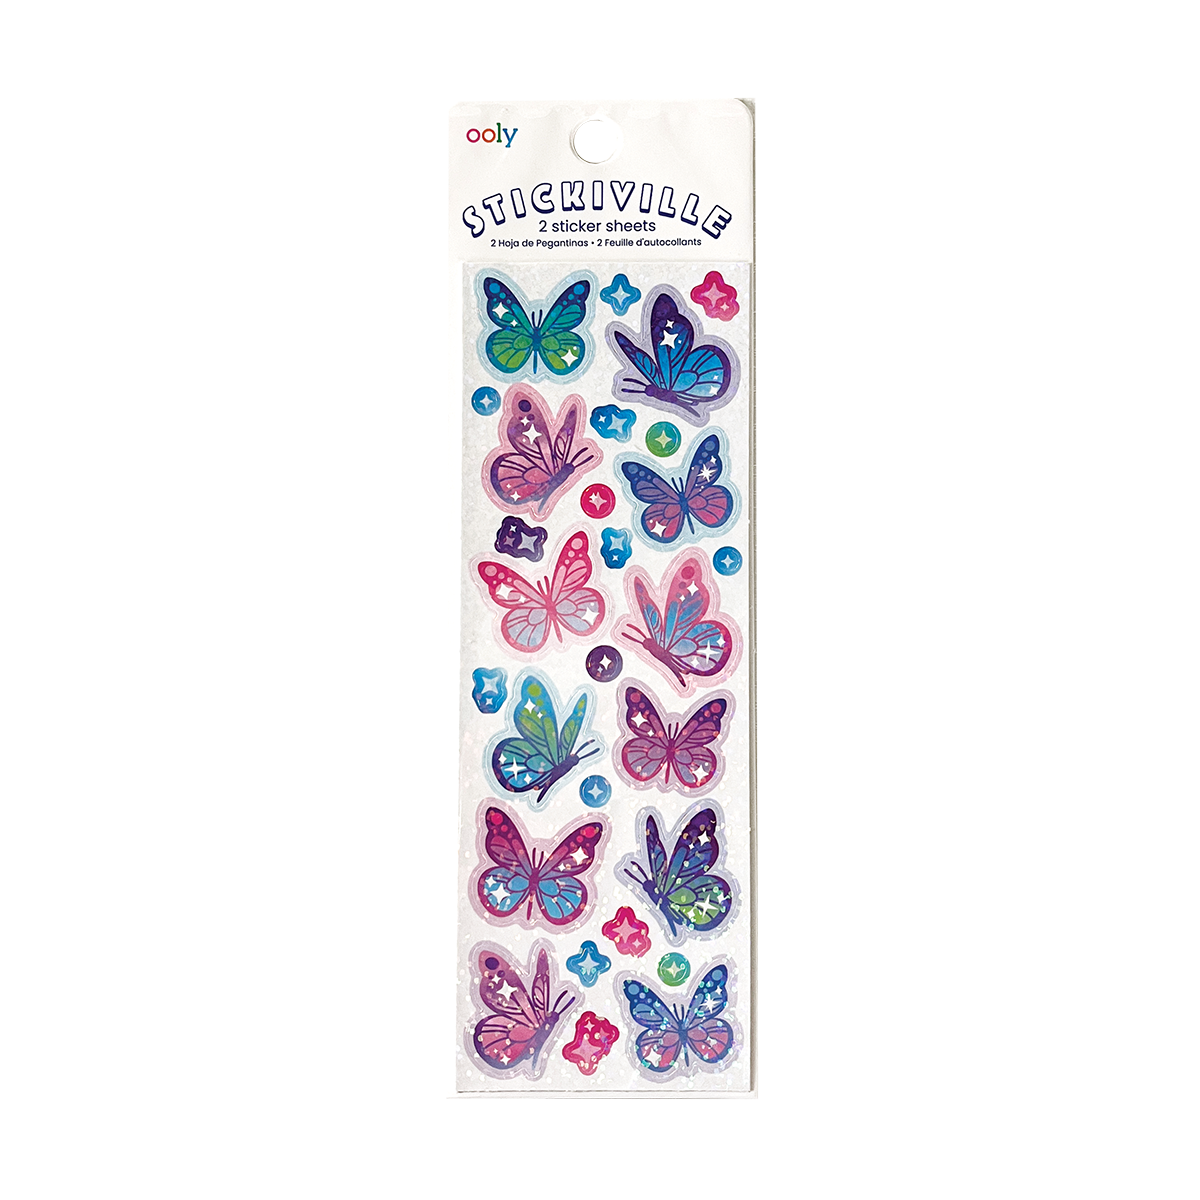 OOLY Stickiville Butterflies Stickers in packaging